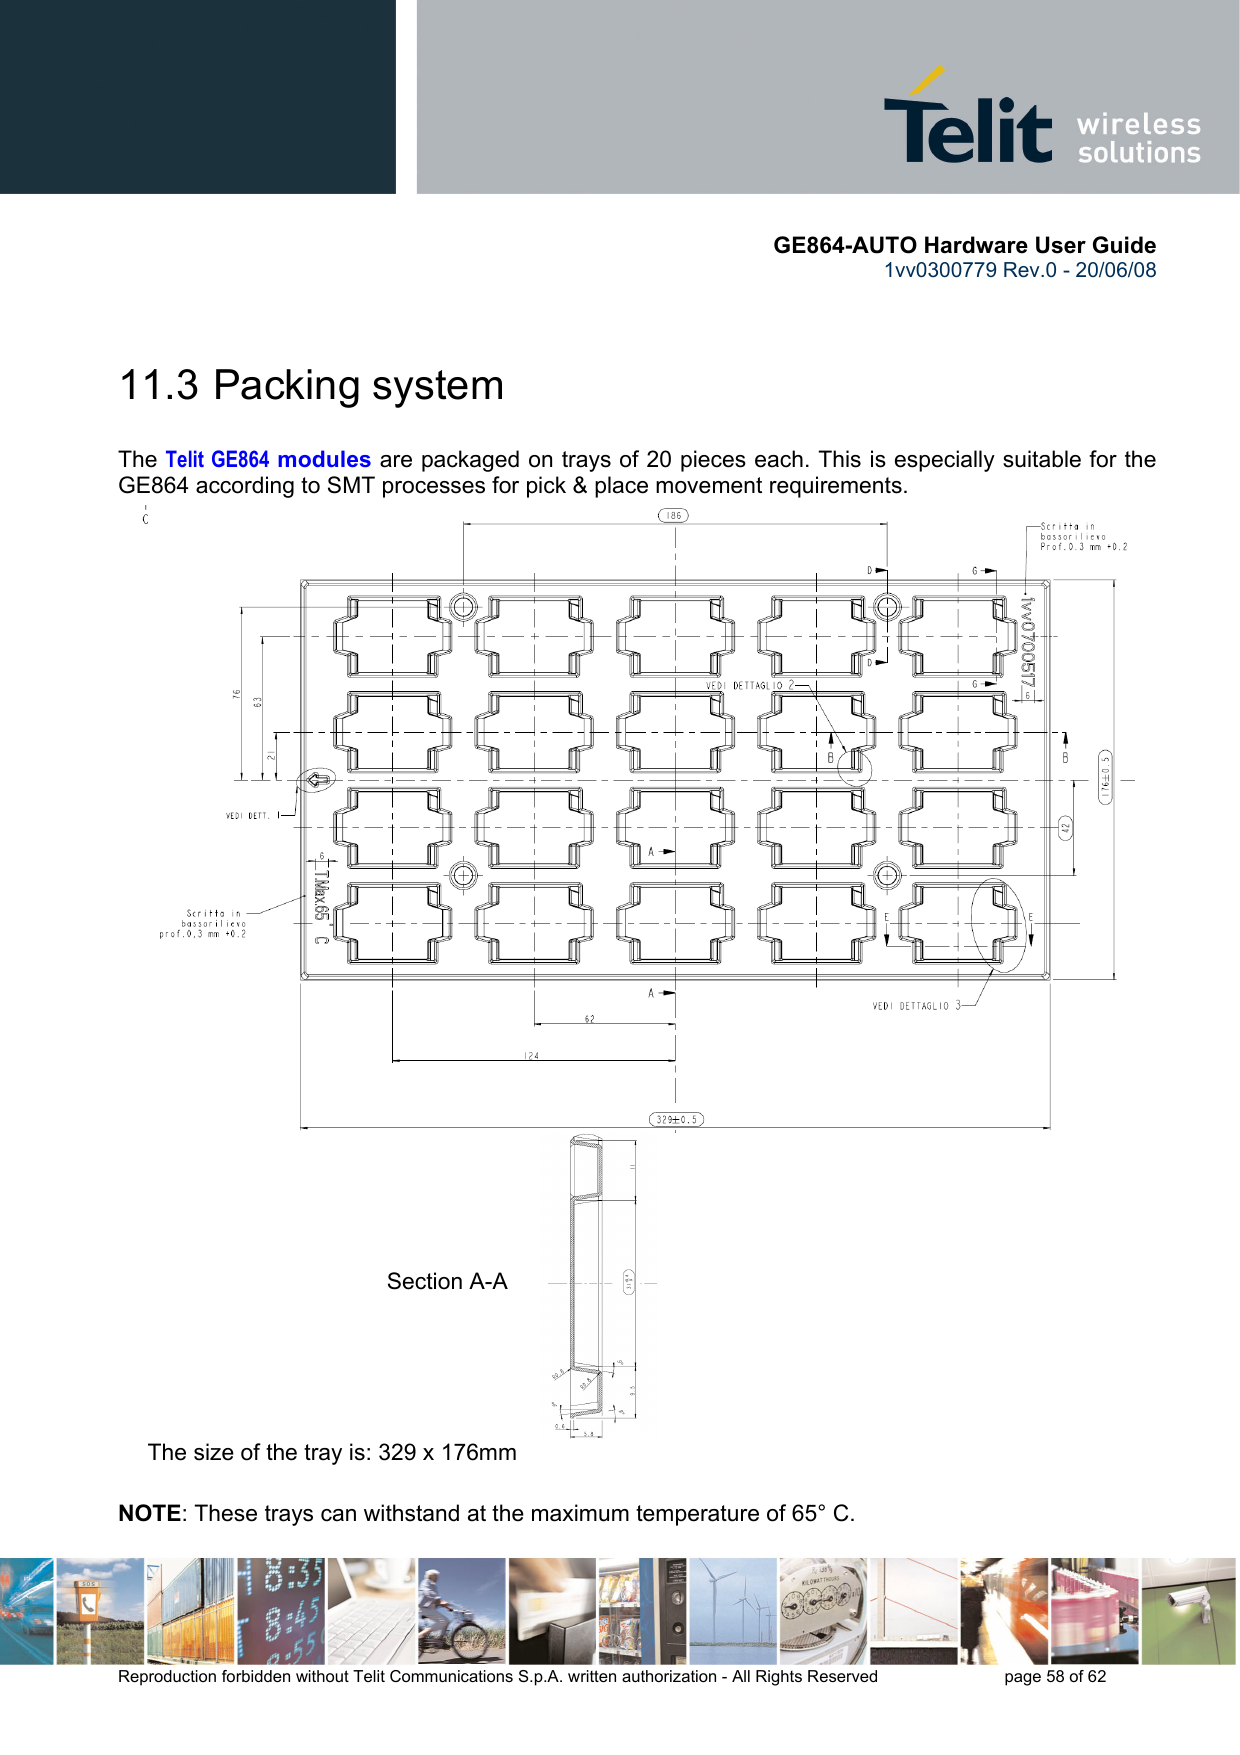       GE864-AUTO Hardware User Guide 1vv0300779 Rev.0 - 20/06/08      Reproduction forbidden without Telit Communications S.p.A. written authorization - All Rights Reserved    page 58 of 62   11.3  Packing system  The Telit GE864 modules are packaged on trays of 20 pieces each. This is especially suitable for the GE864 according to SMT processes for pick &amp; place movement requirements.  The size of the tray is: 329 x 176mm  NOTE: These trays can withstand at the maximum temperature of 65° C. Section A-A 